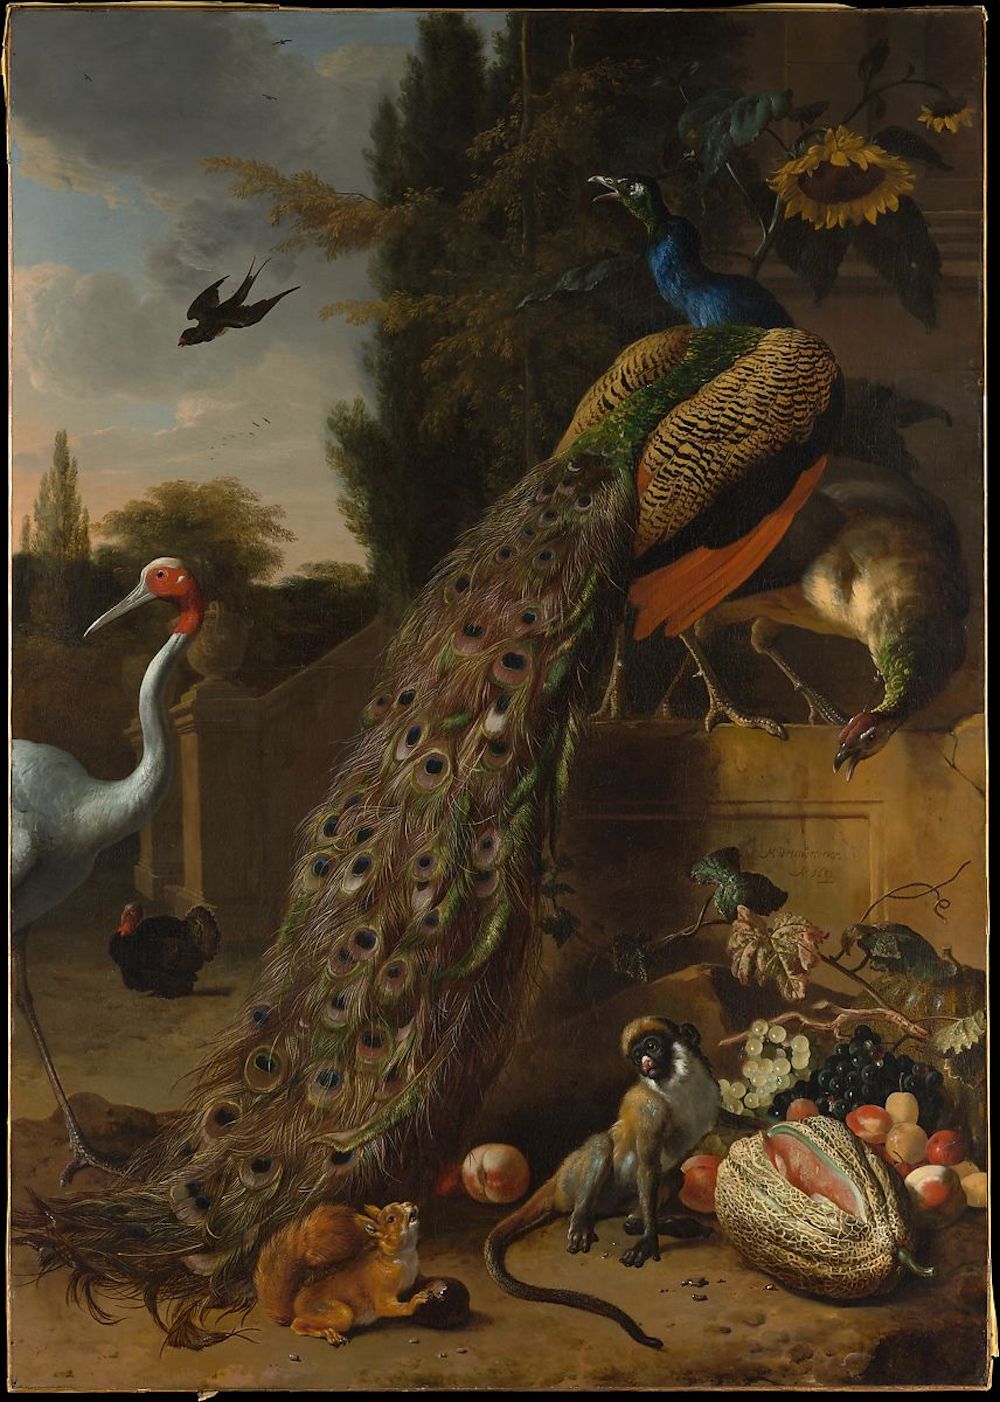 Peacocks Artist: Melchior d' Hondecoeter (Dutch, Utrecht 1636–1695 Amsterdam) Date: 1683 Medium: Oil on canvas Dimensions: 74 7/8 x 53 in. (190.2 x 134.6 cm) Classification: Paintings Credit Line: Gift of Samuel H. Kress, 1927 Accession Number: 27.250.1